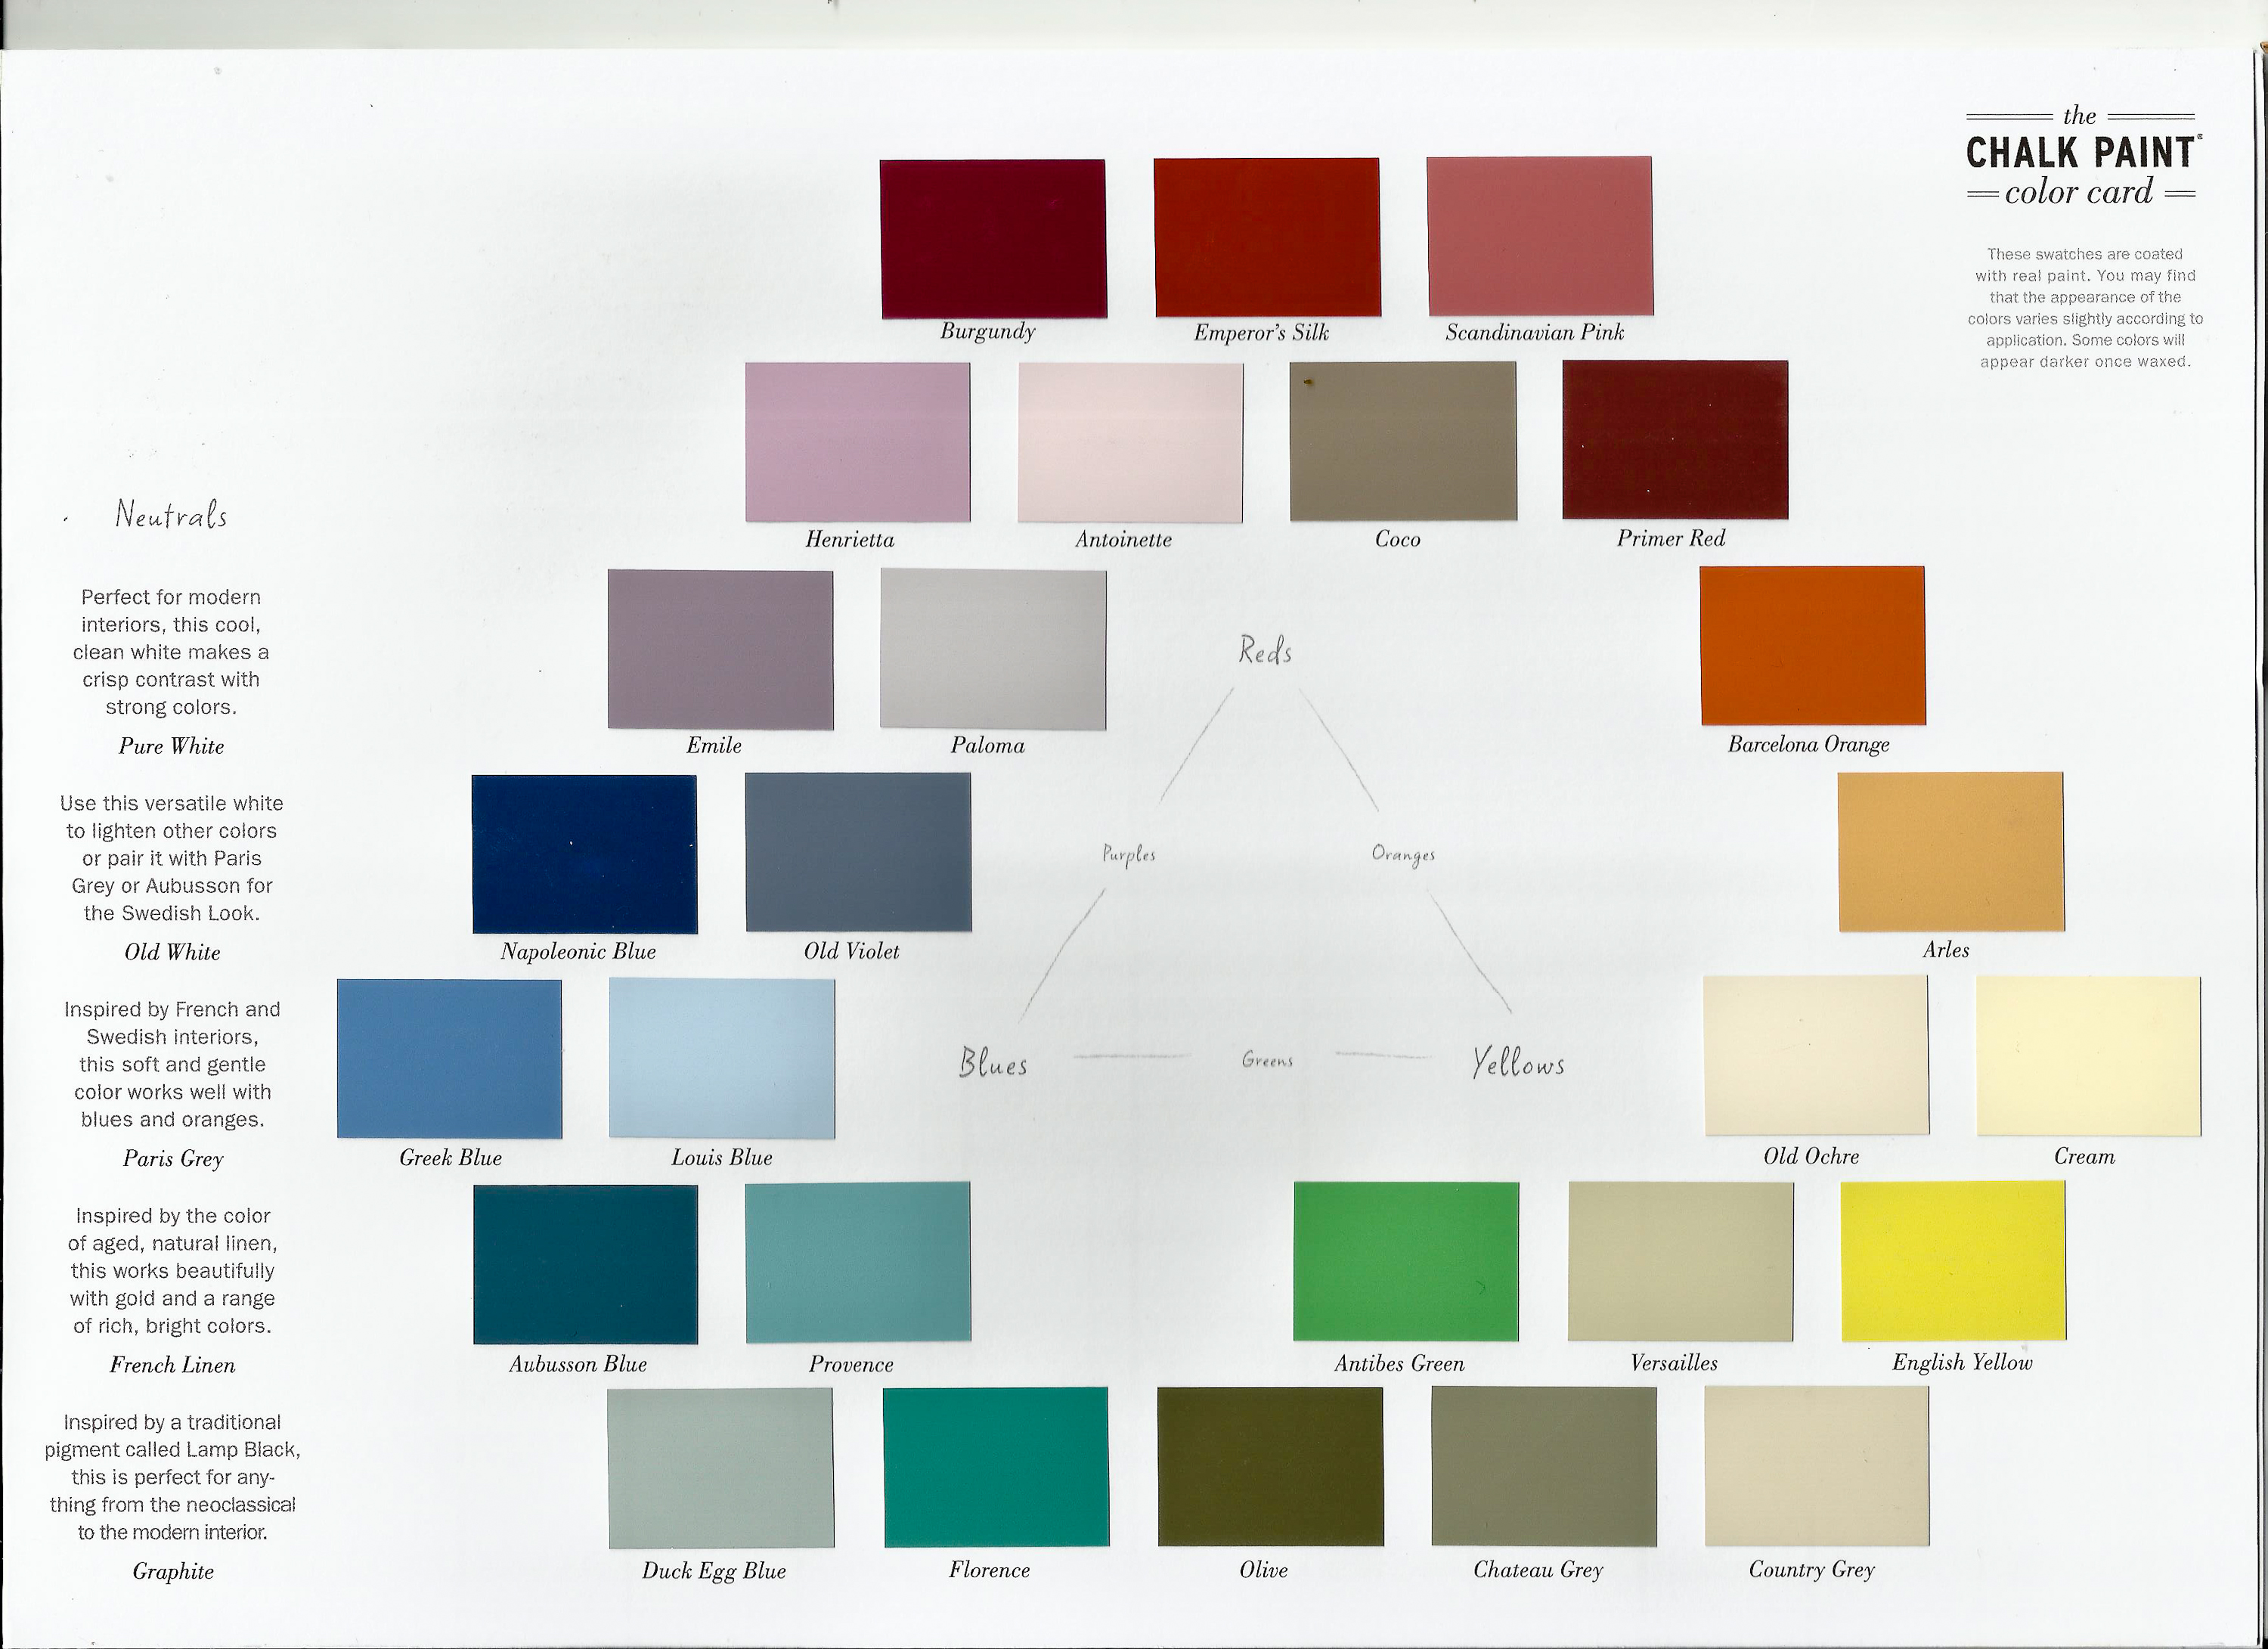 Chalk Paint® Color Card - Knot Too Shabby Furnishings